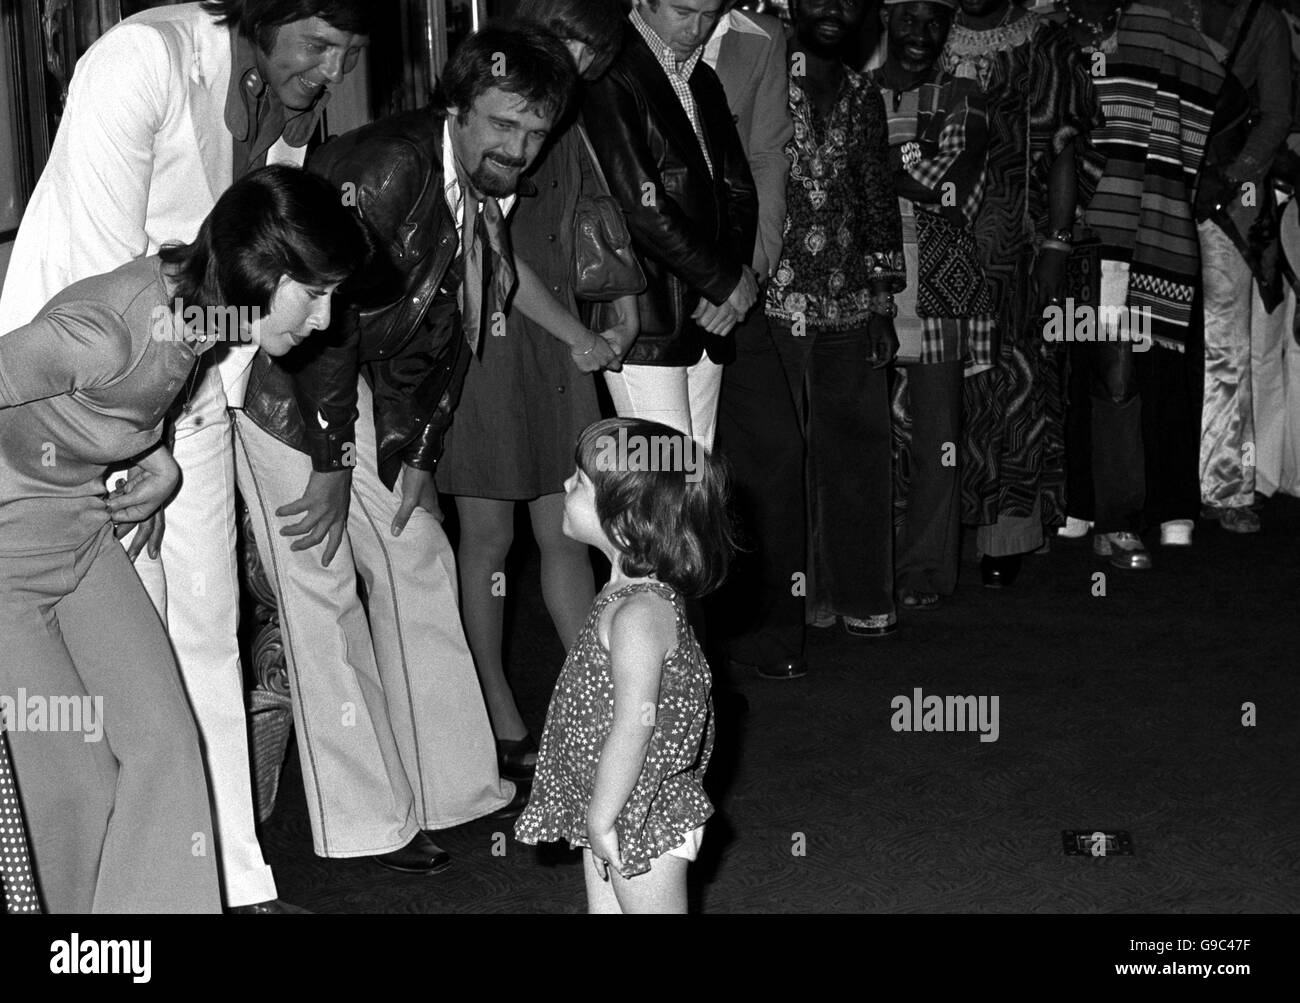 Caroline Urquart, who is nearly four, stands in for Princess Anne. being presented to caroline, who attends one of the fund's playgroups are Helen Shapiro, Marty Wilde (white suit) and Duanne Eddy, who star in the show. Caroline will herself meet Princess Anne on the night, when she presents her with a bouquet. Stock Photo